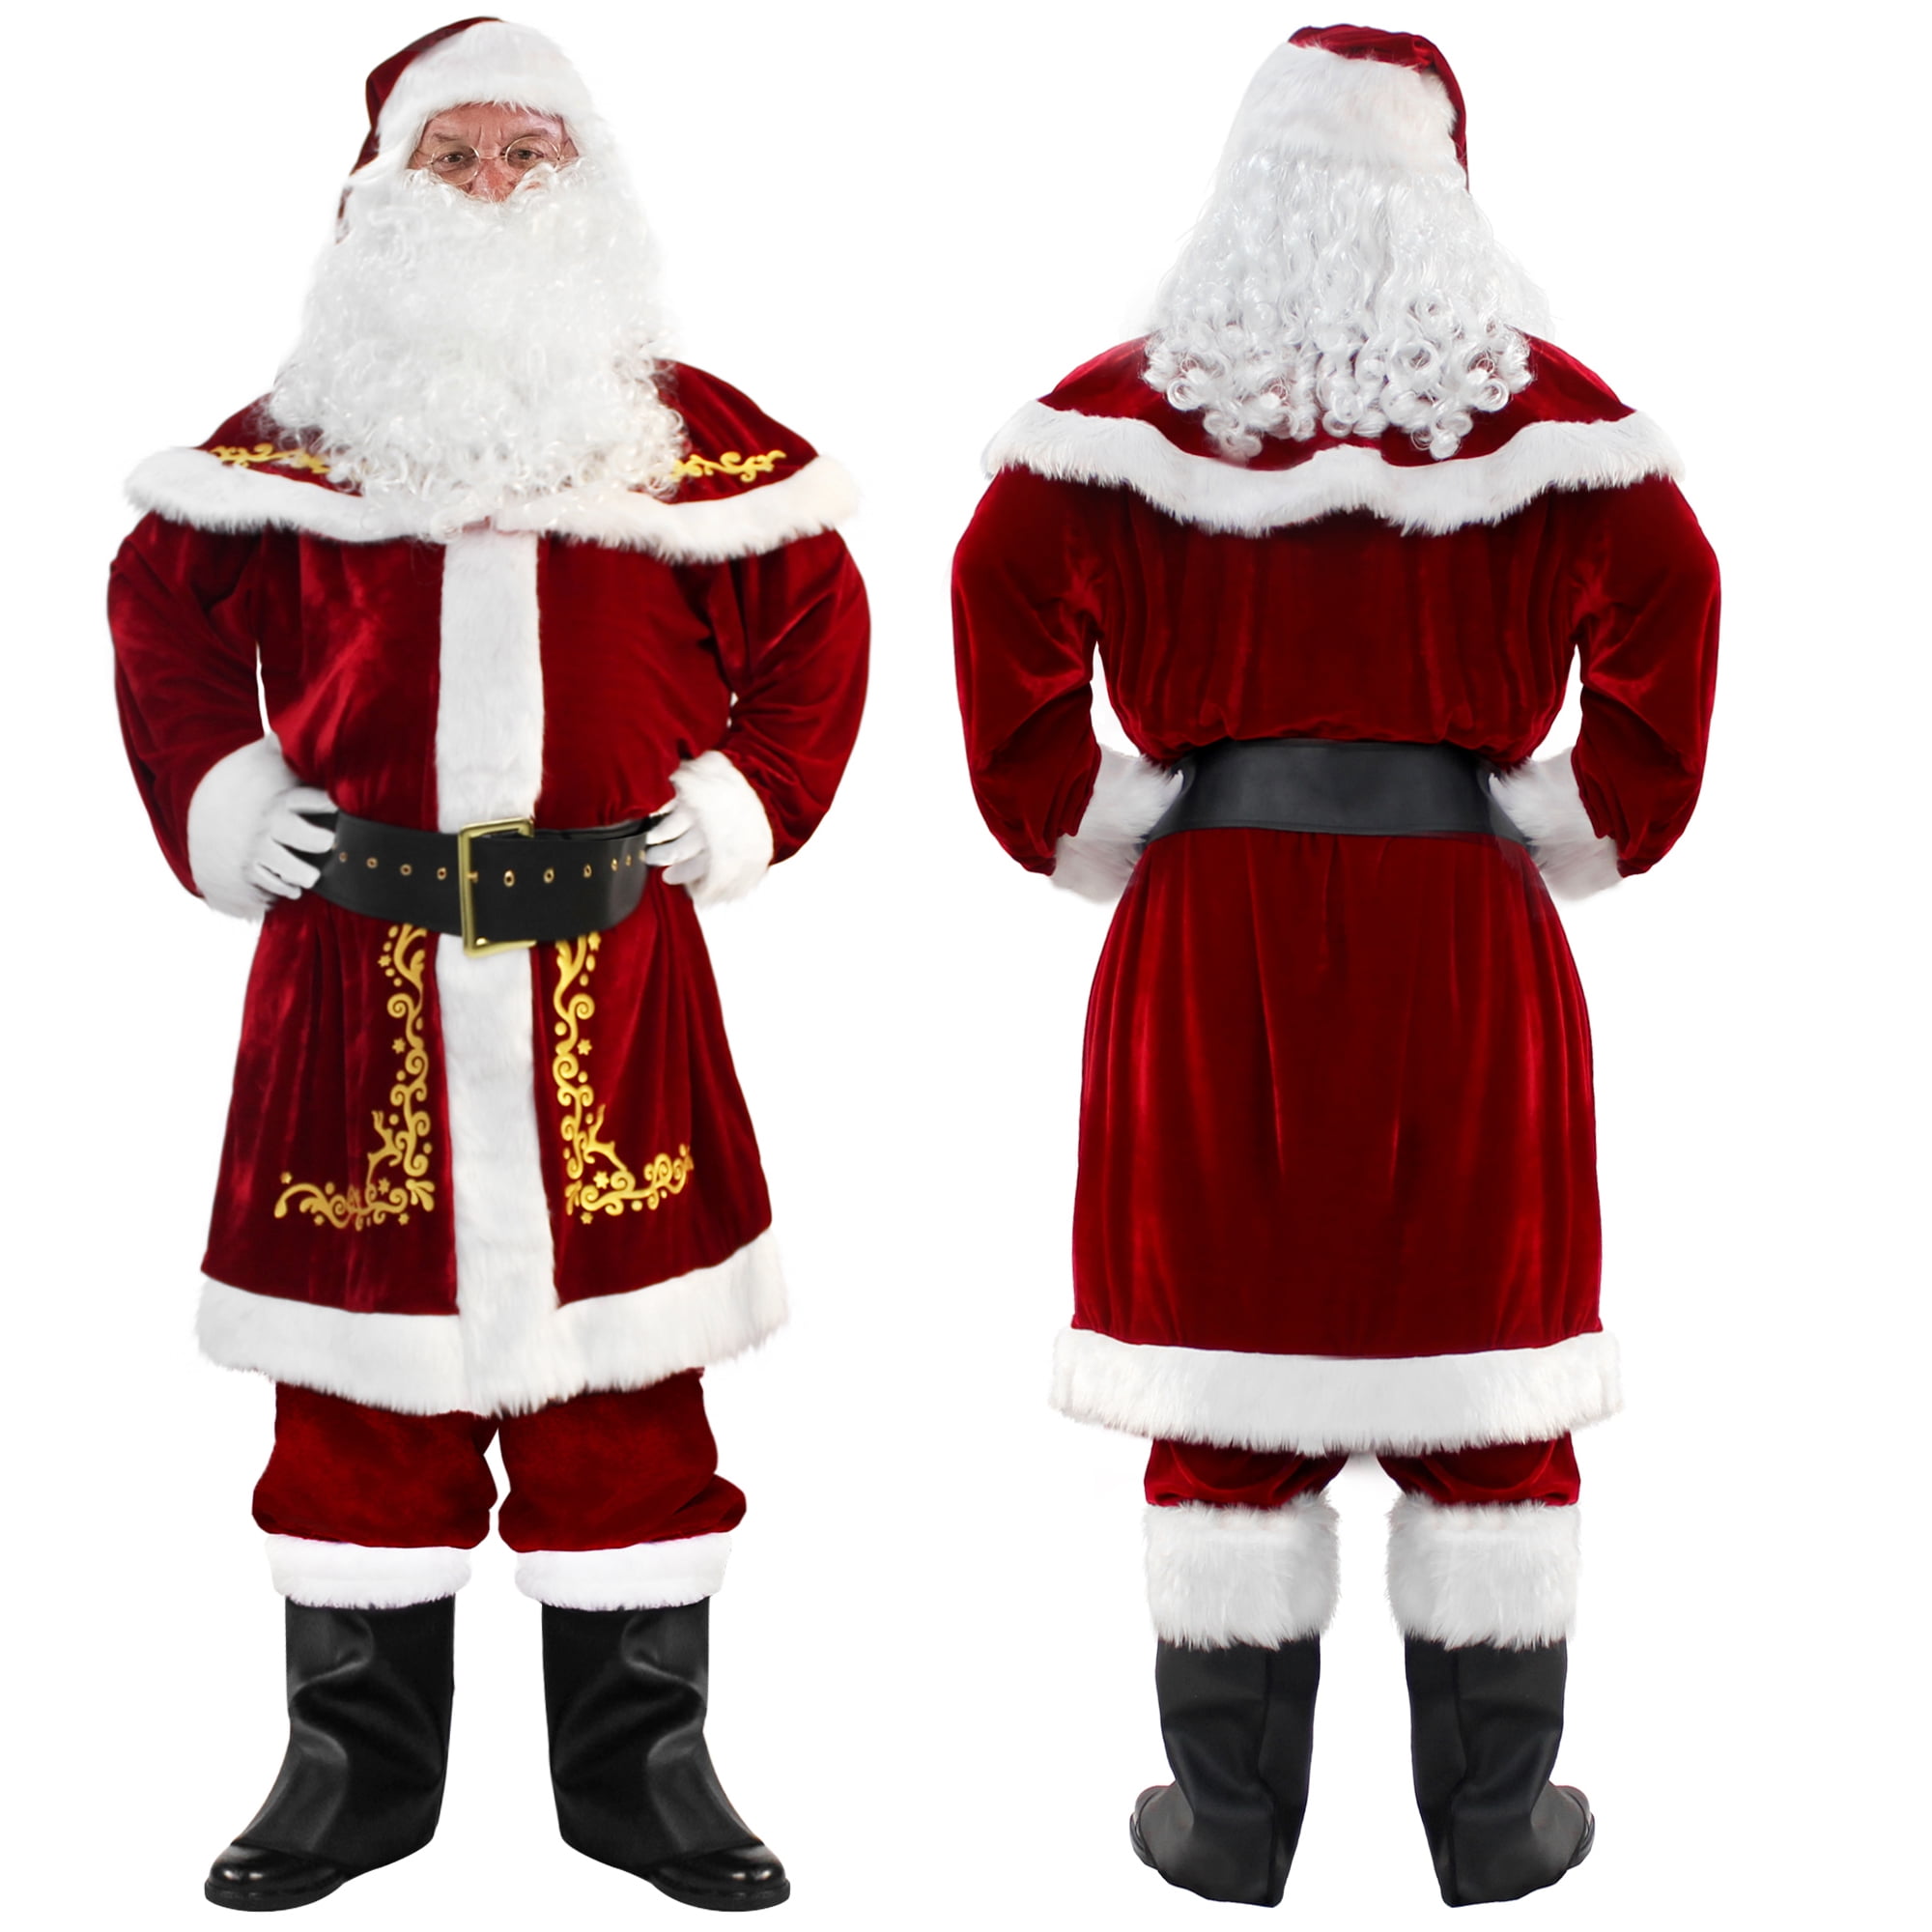 SANTA EYEBROWS WHITE SELF ADHESIVE FANCY DRESS FATHER CHRISTMAS ACCESSORY ADULTS 